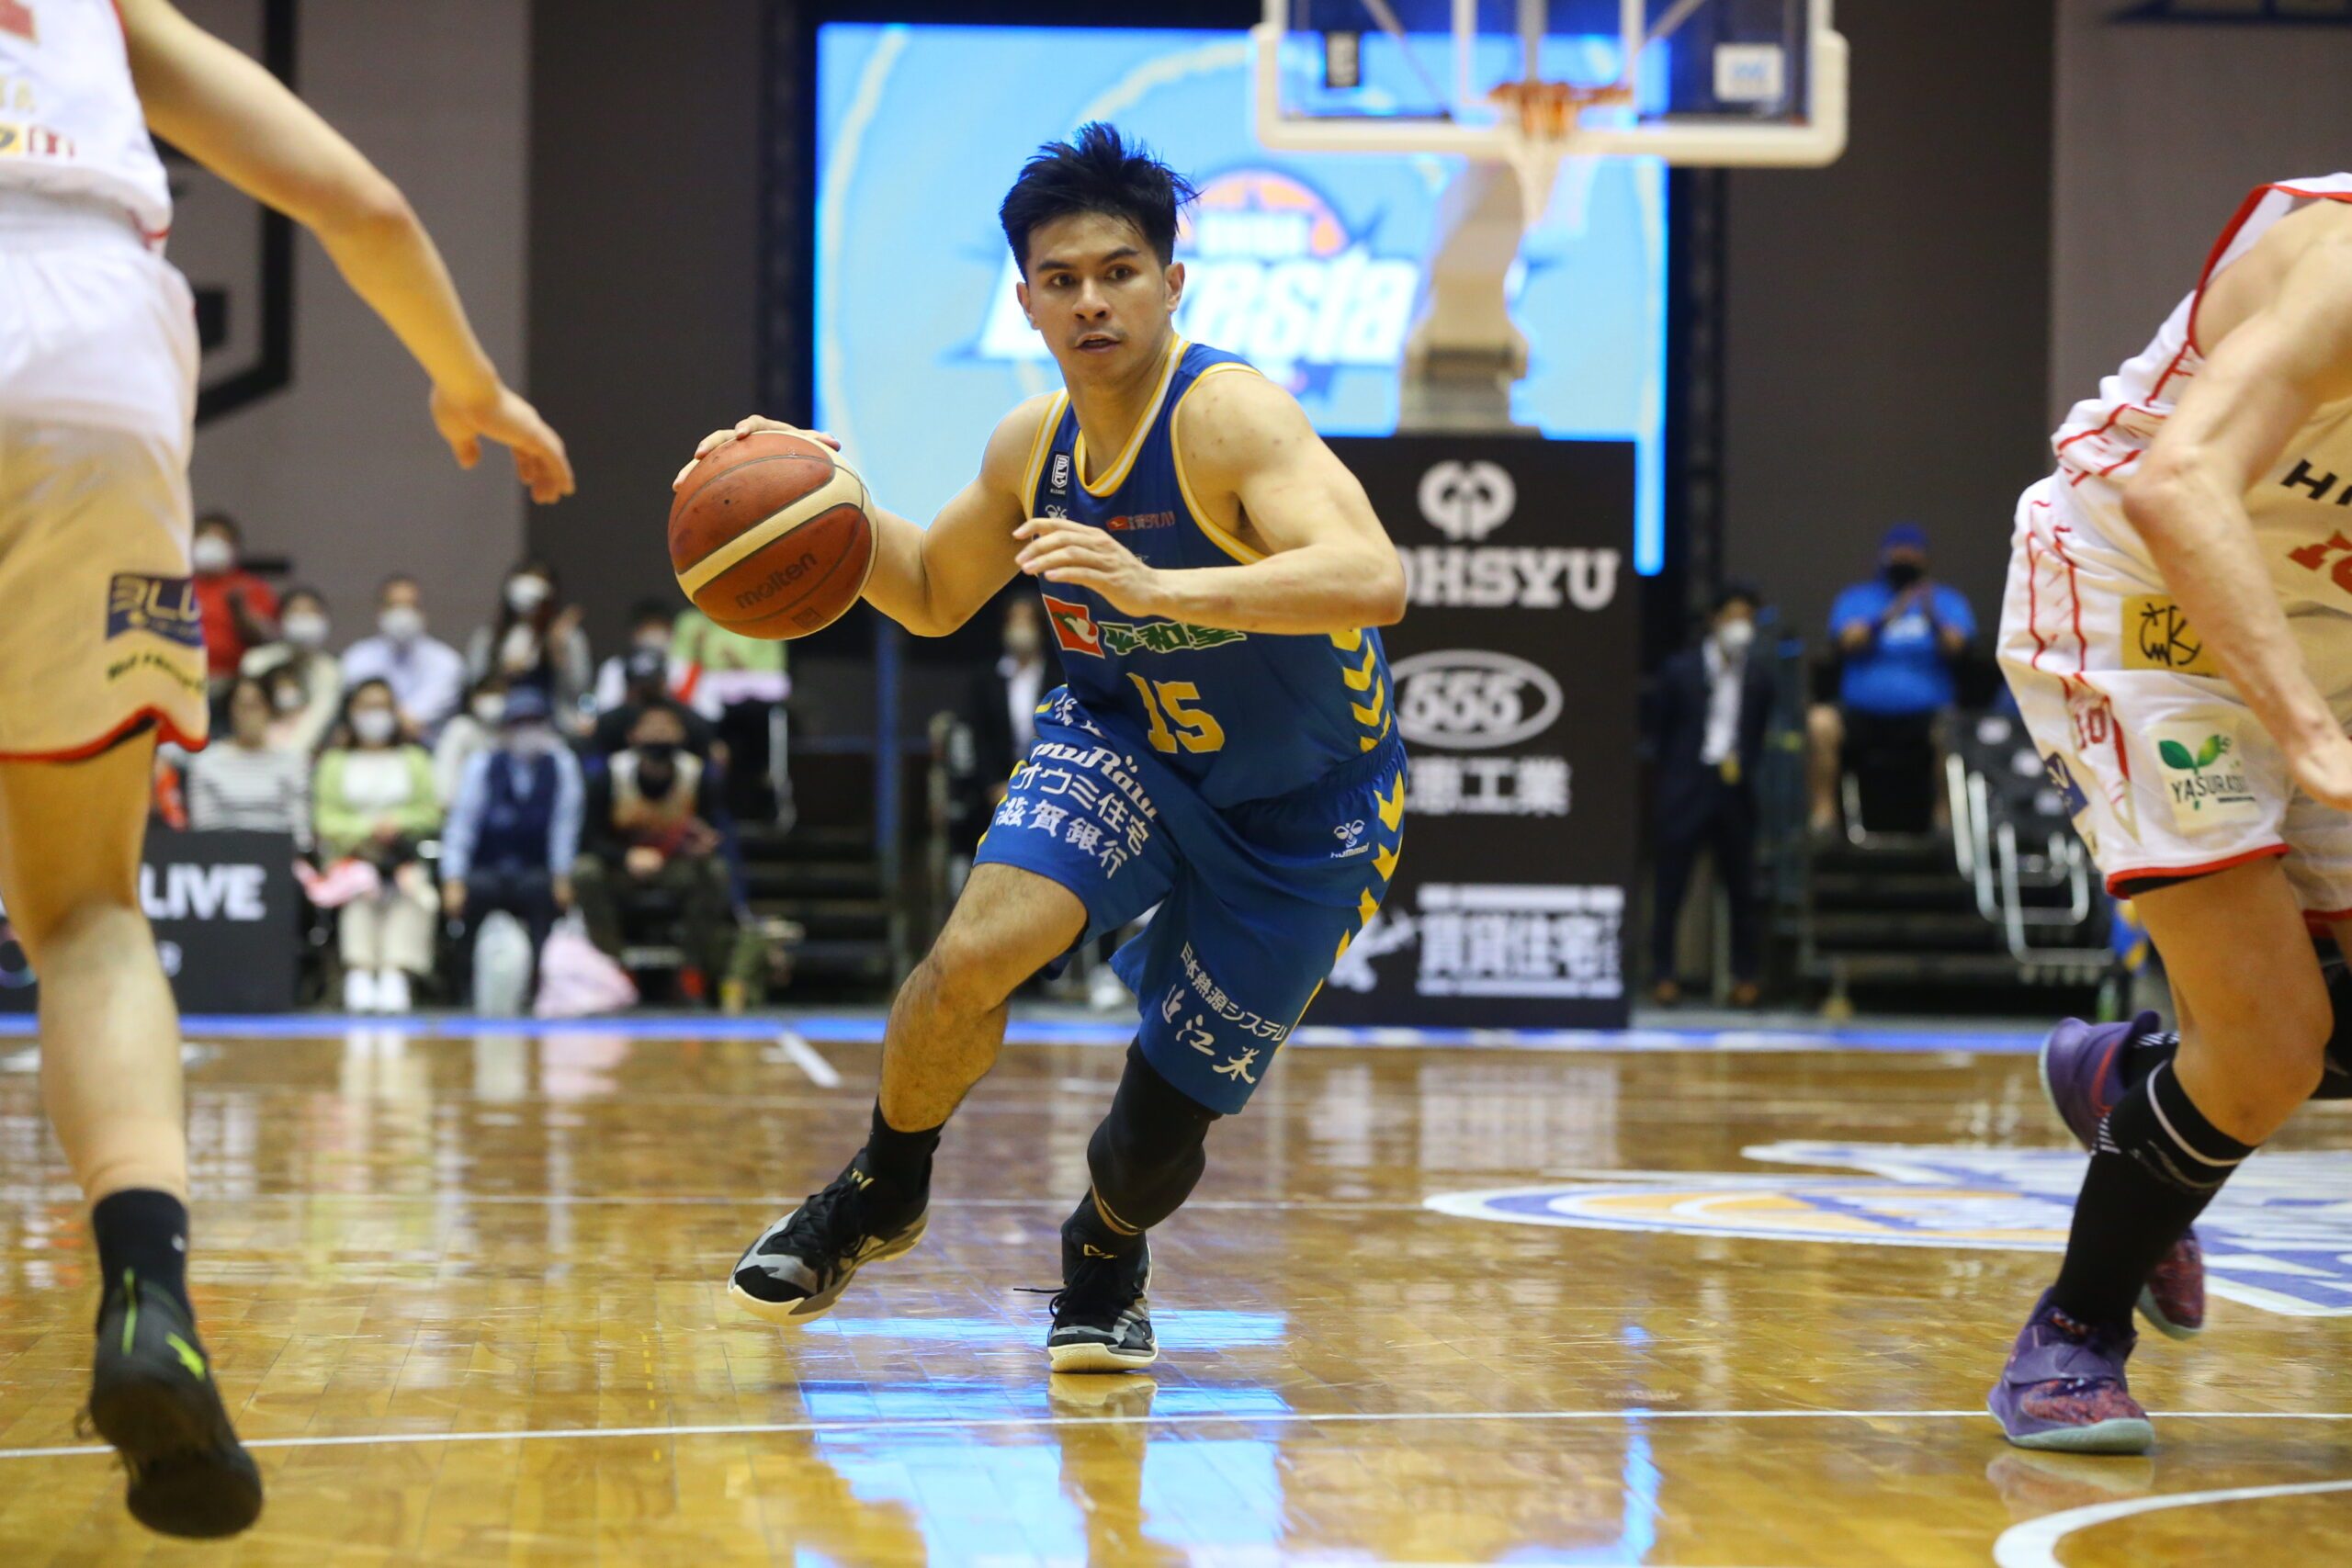 Kiefer Ravena, other Pinoy imports suffer lopsided losses